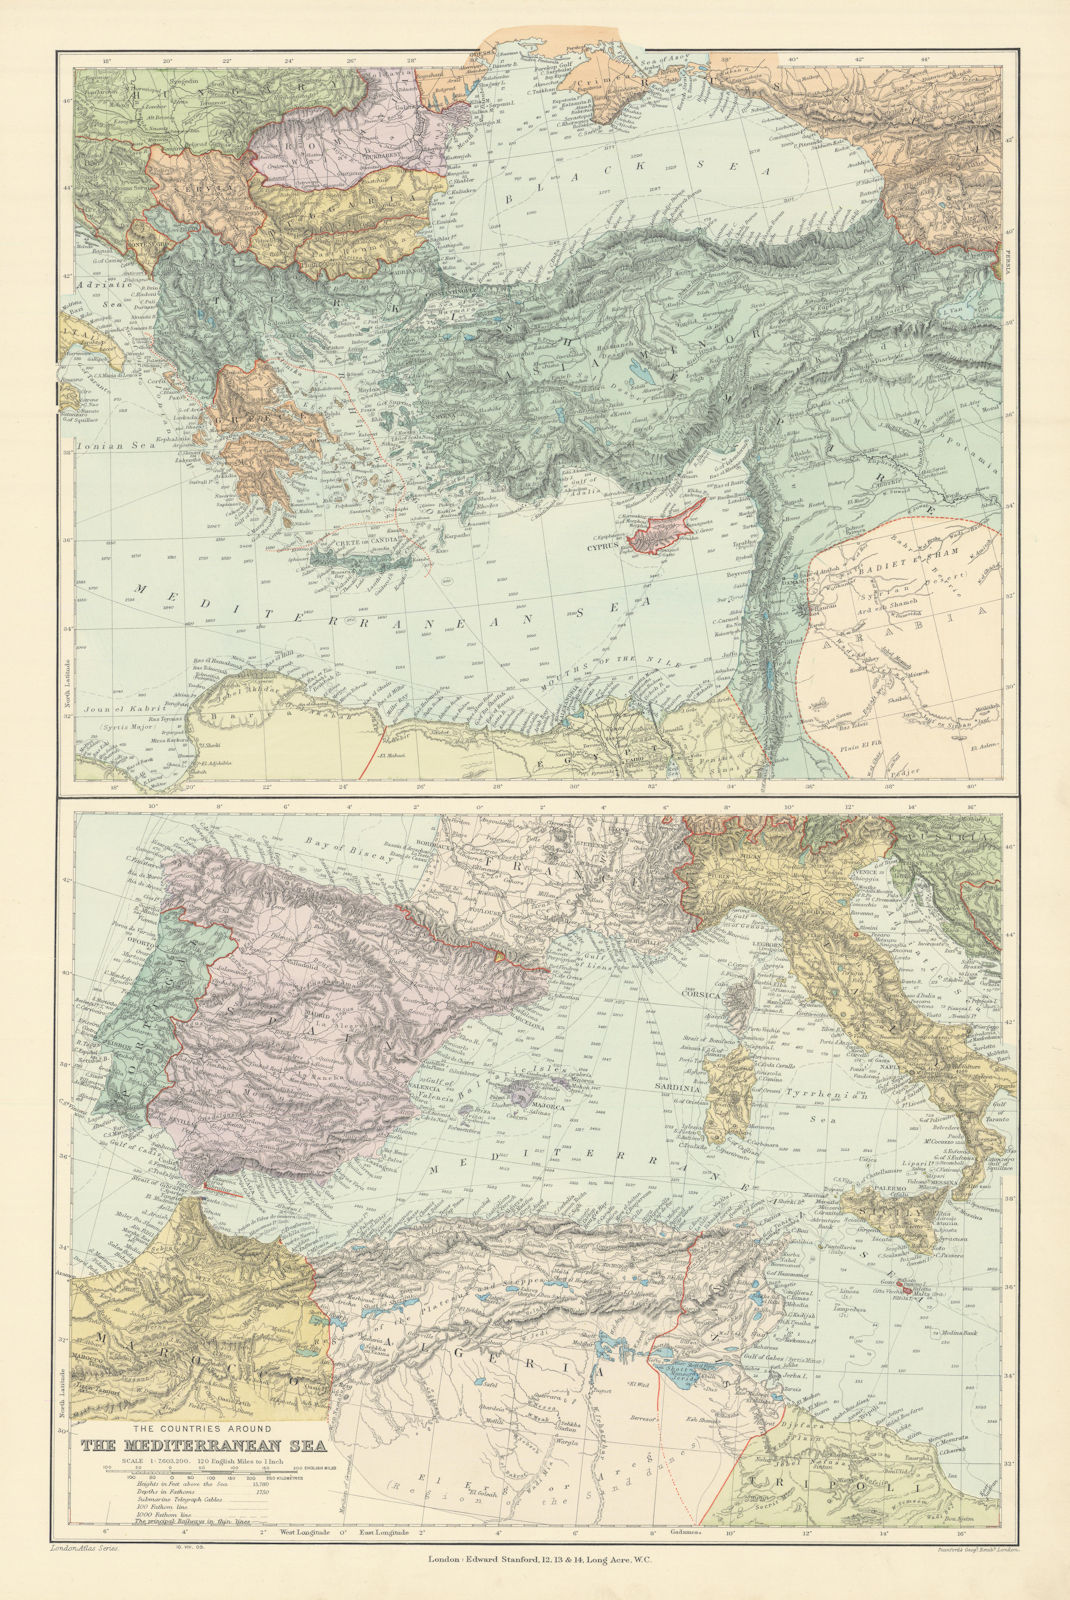 Associate Product Countries round the Mediterranean. Soundings Telegraph cables. STANFORD 1904 map